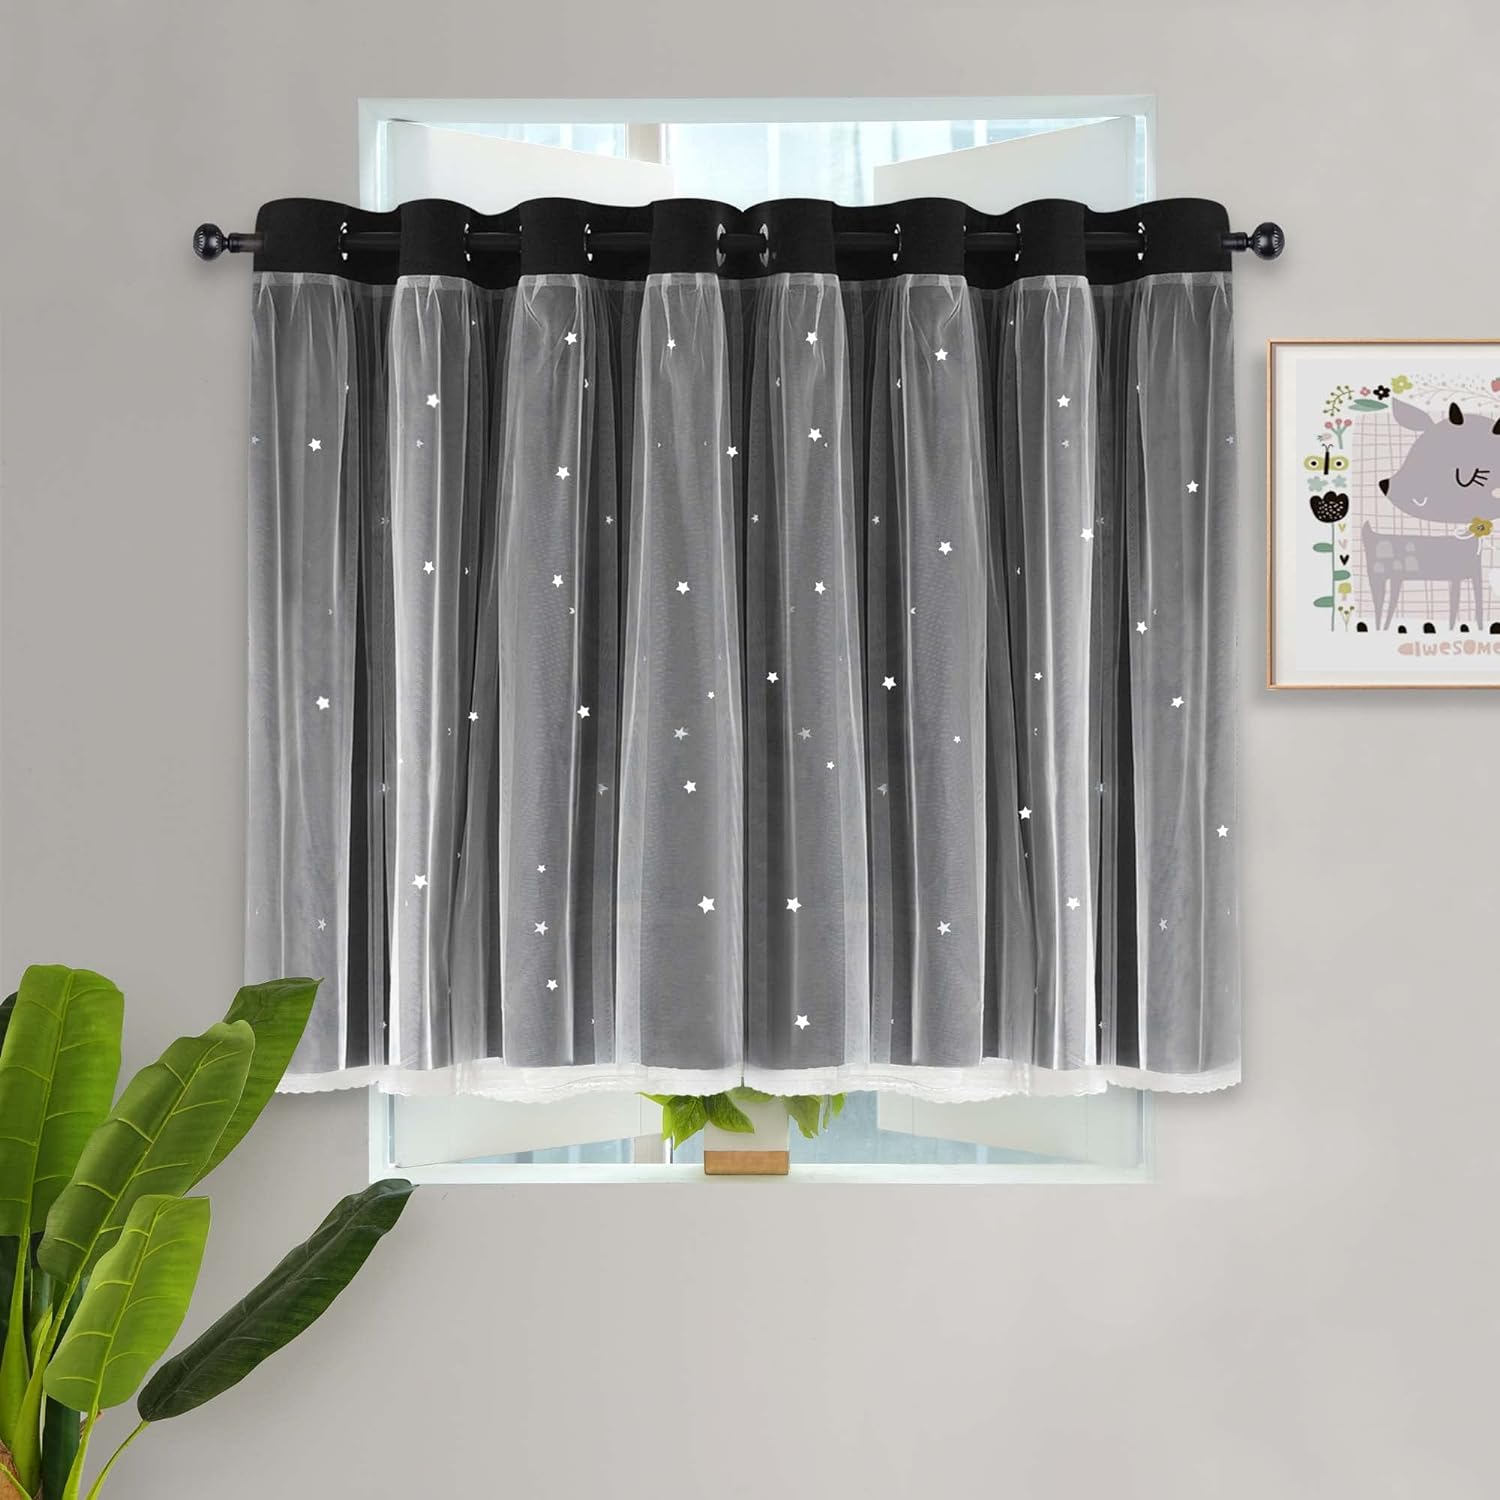 Kinryb Black Star Cut-Out Blackout Curtains Review